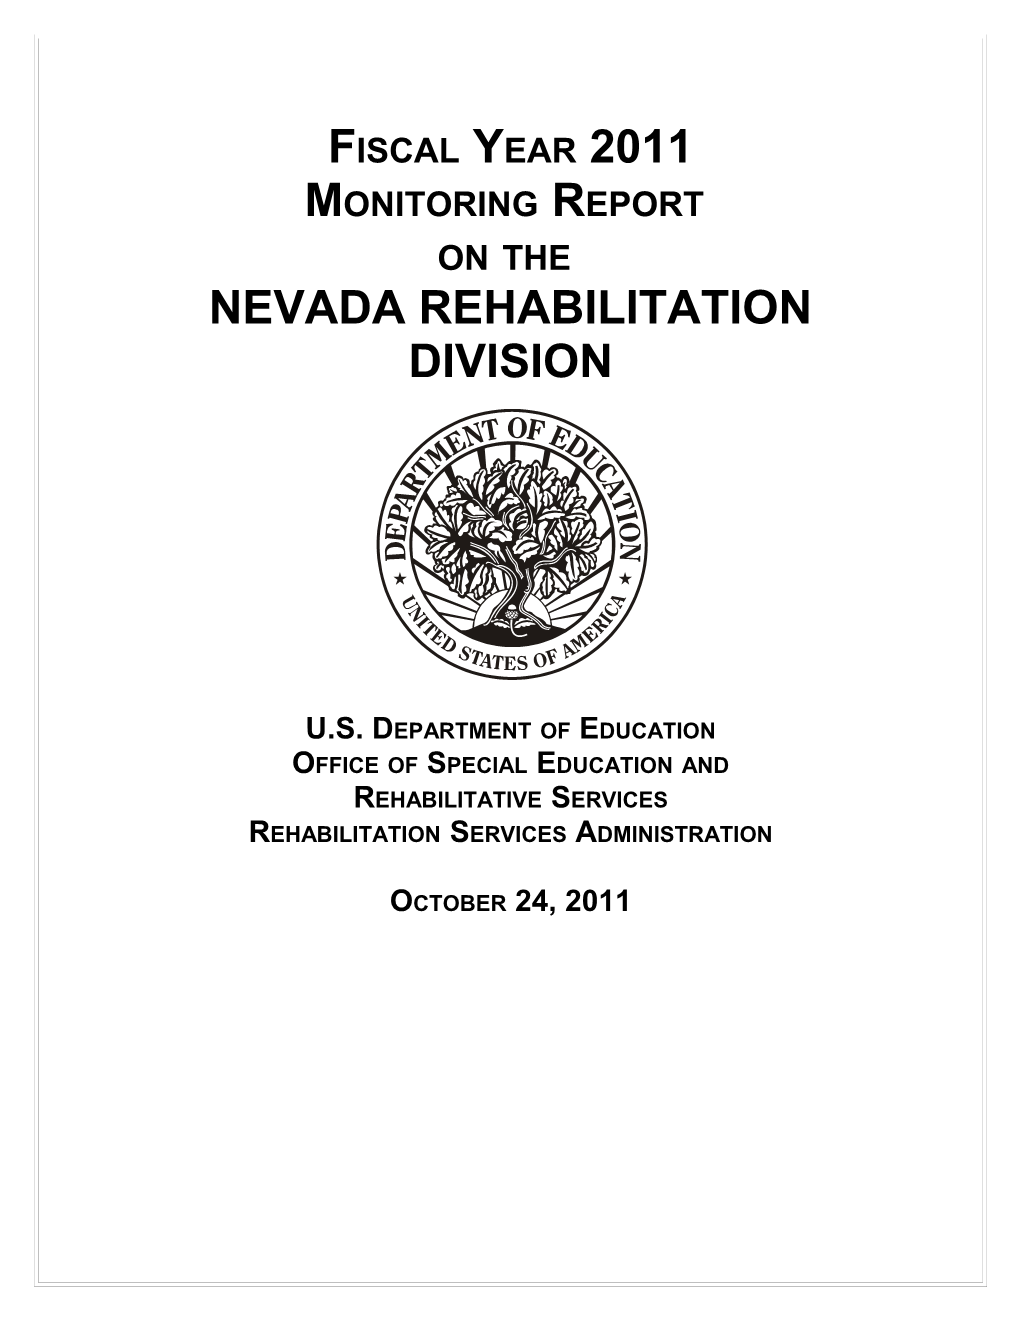 Fiscal Year 2011 Monitoring Report on the Nevada Rehabilitation Division (MS Word)